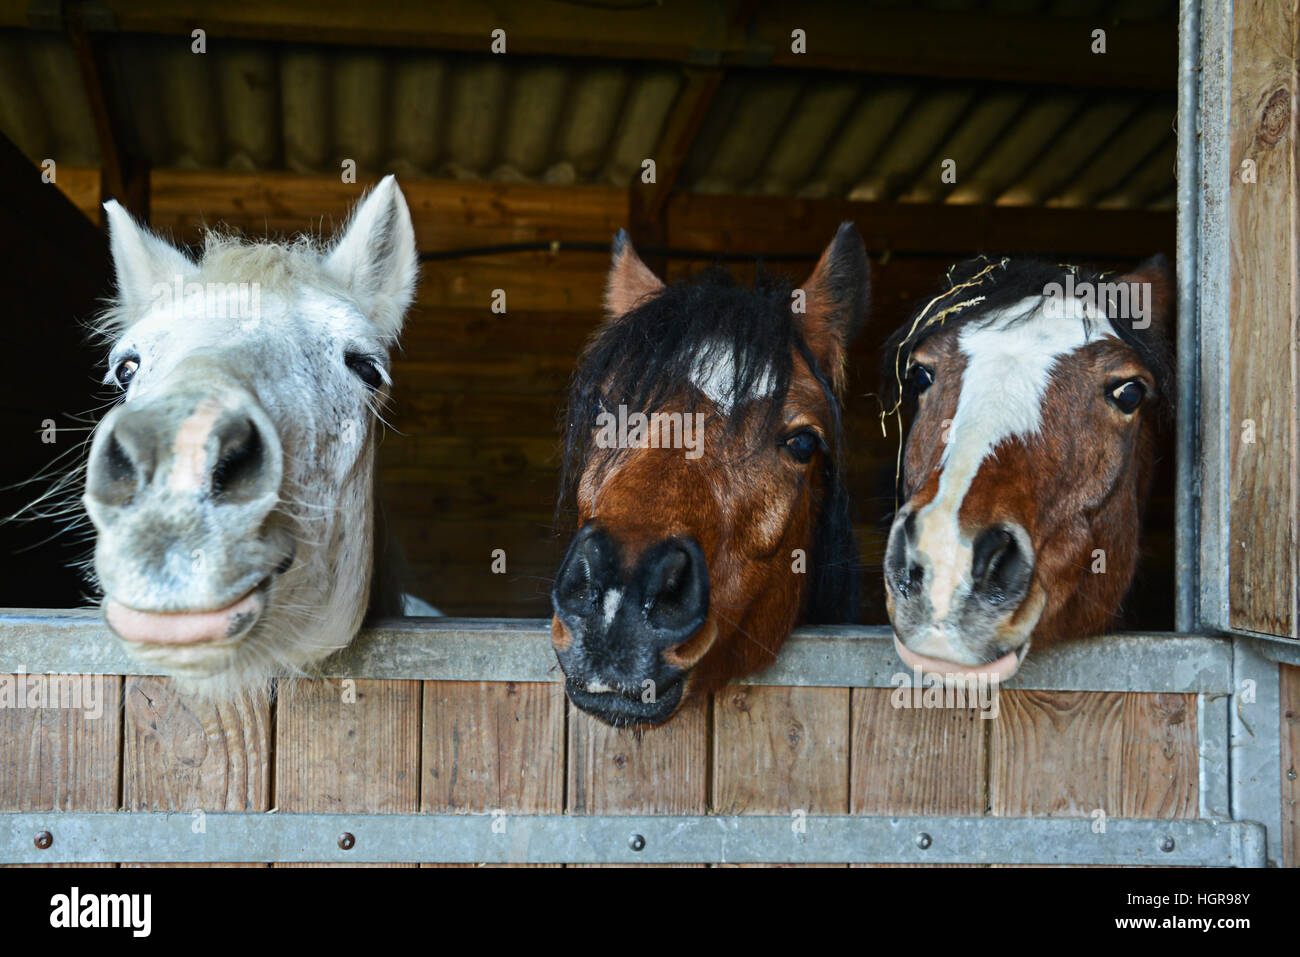 http://c8.alamy.com/comp/HGR98Y/funny-horses-in-their-stable-HGR98Y.jpg